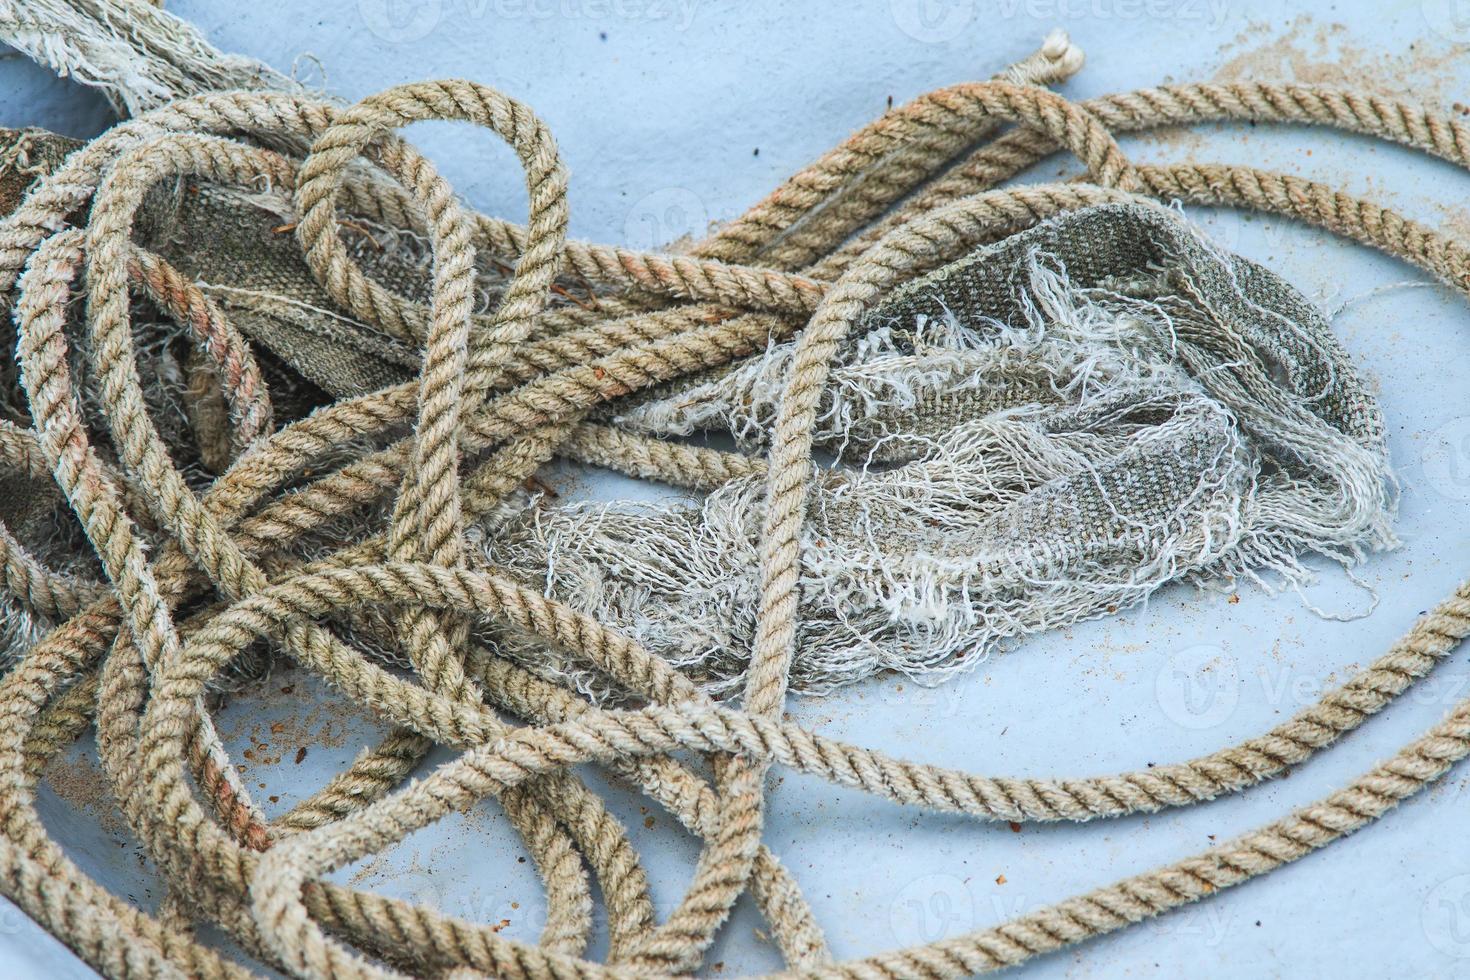 Closeup of coil of nautical rope on fishing boat hull. photo